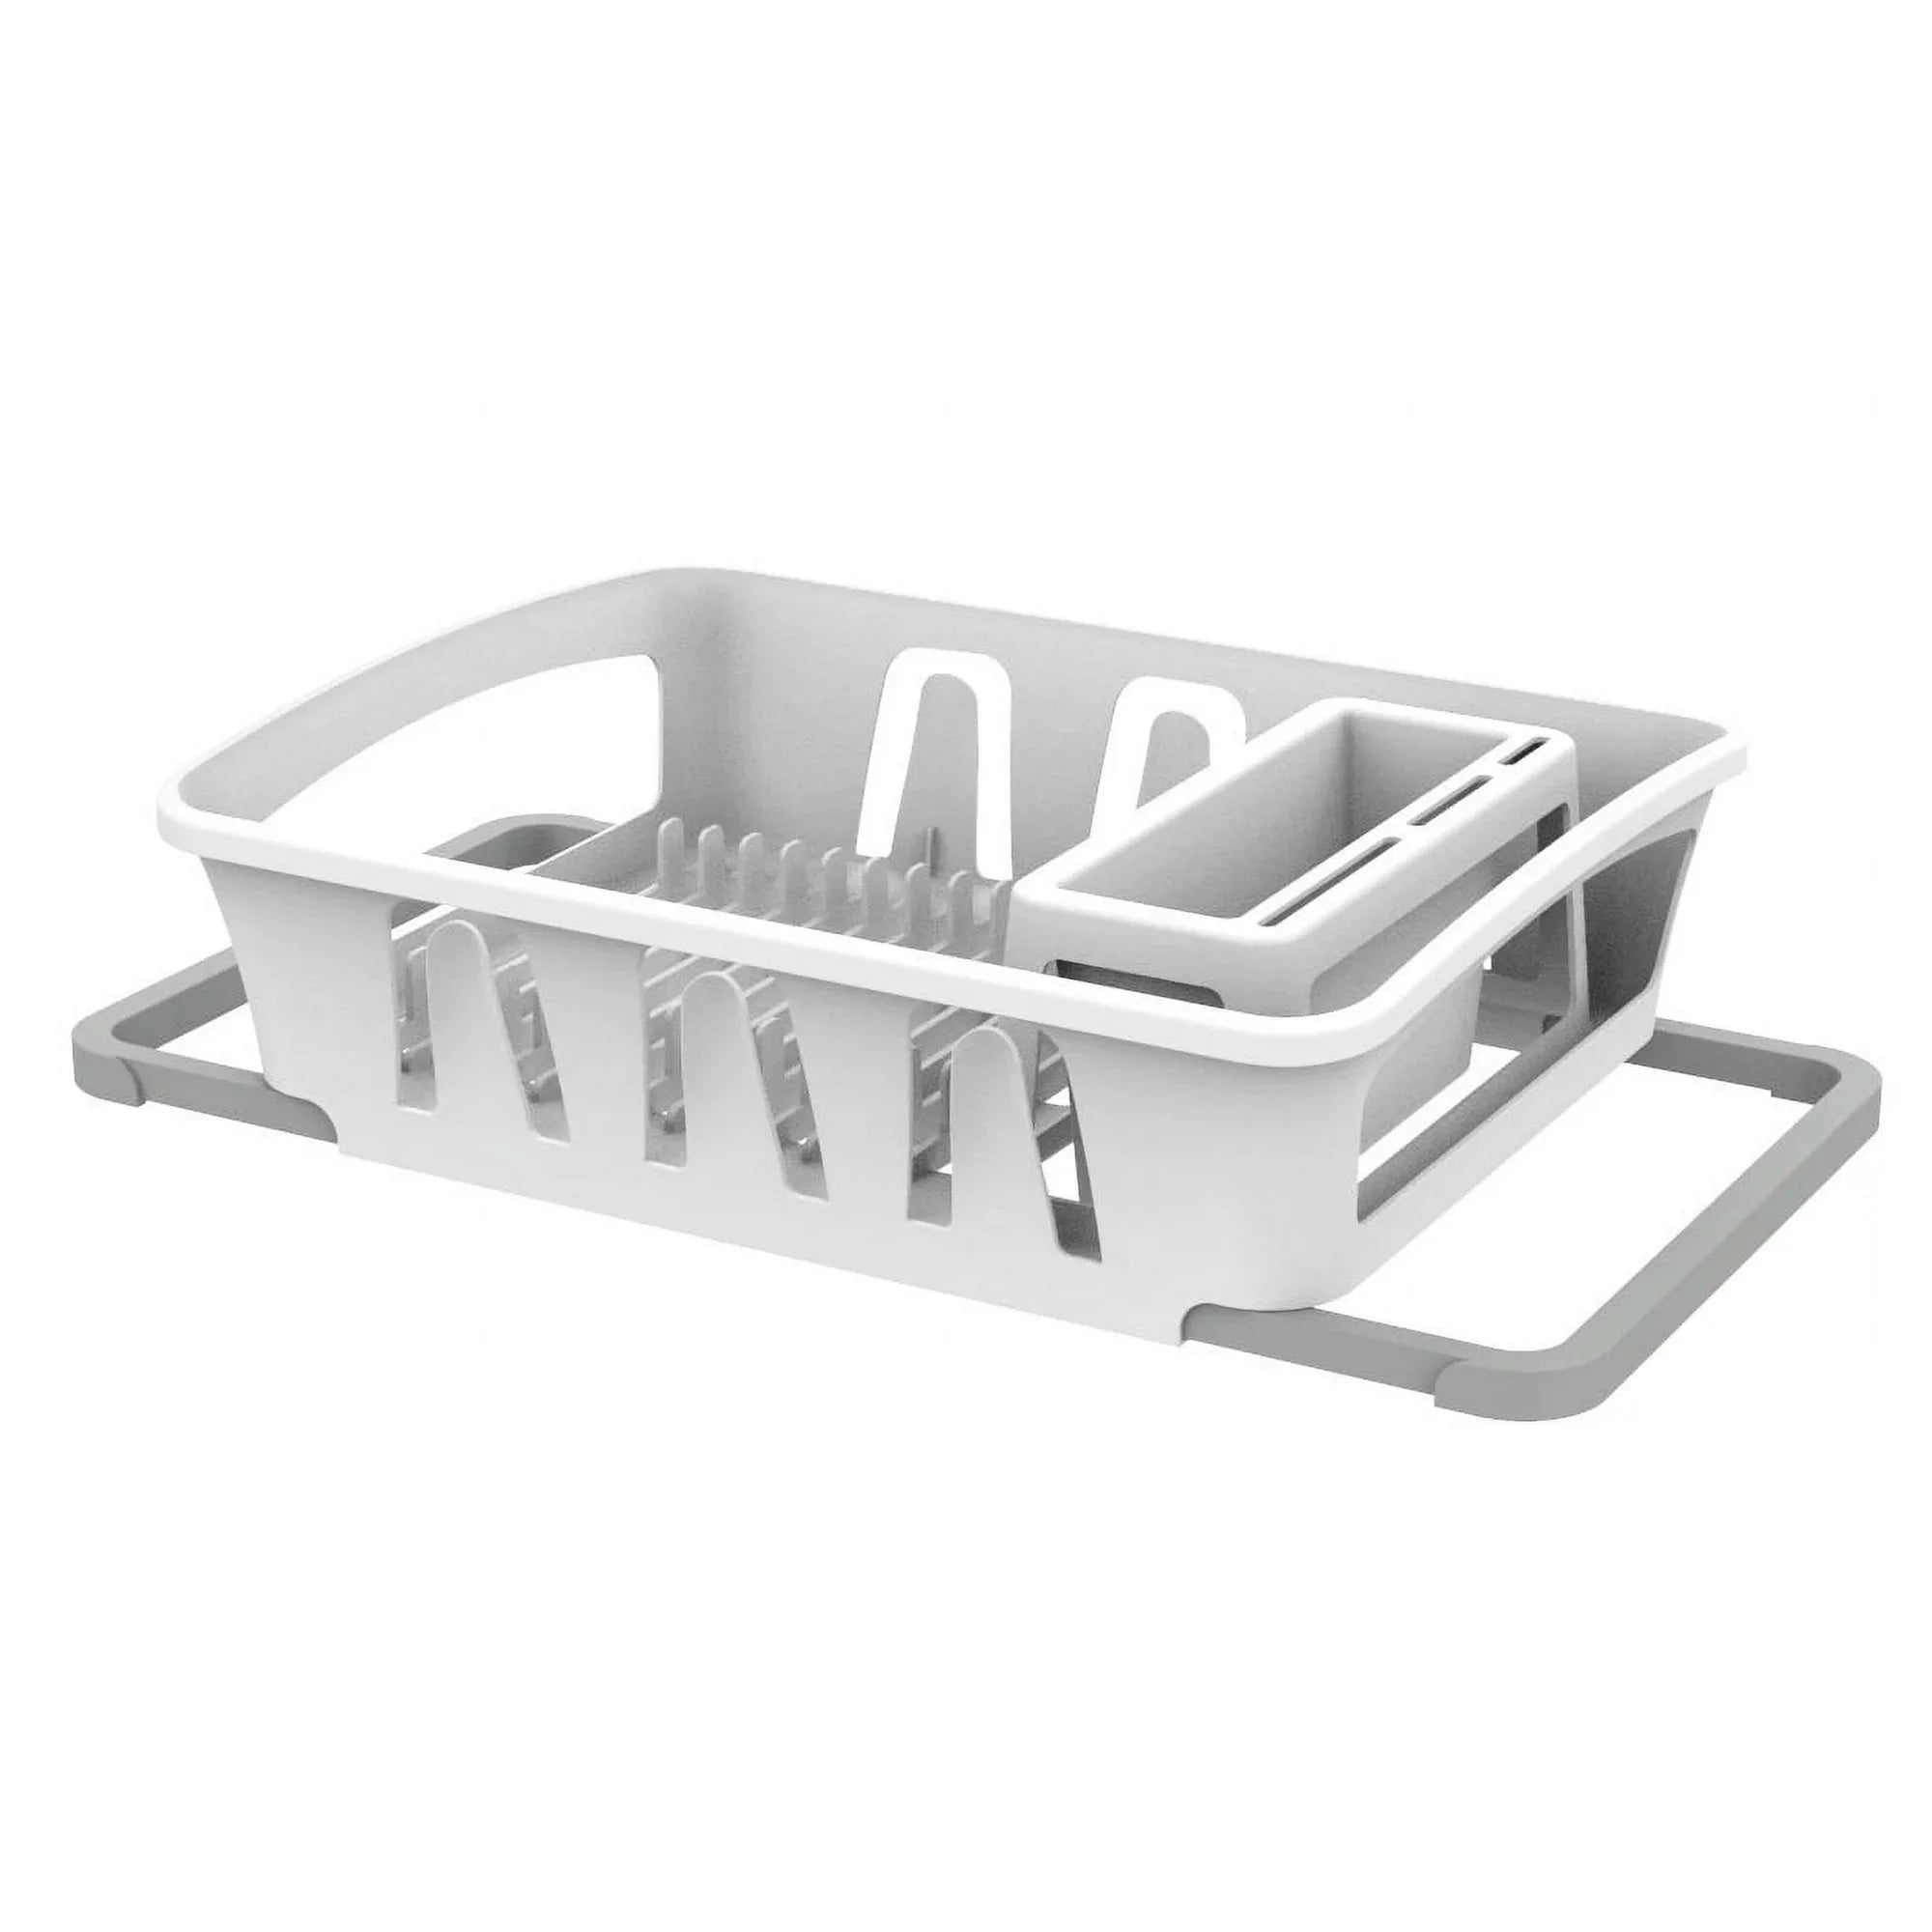 Wholesale prices with free shipping all over United States Dish Drying Rack, Mainstays Expandable Dish Rack with Utensil Holder for Kitchen Countertop, White - Steven Deals